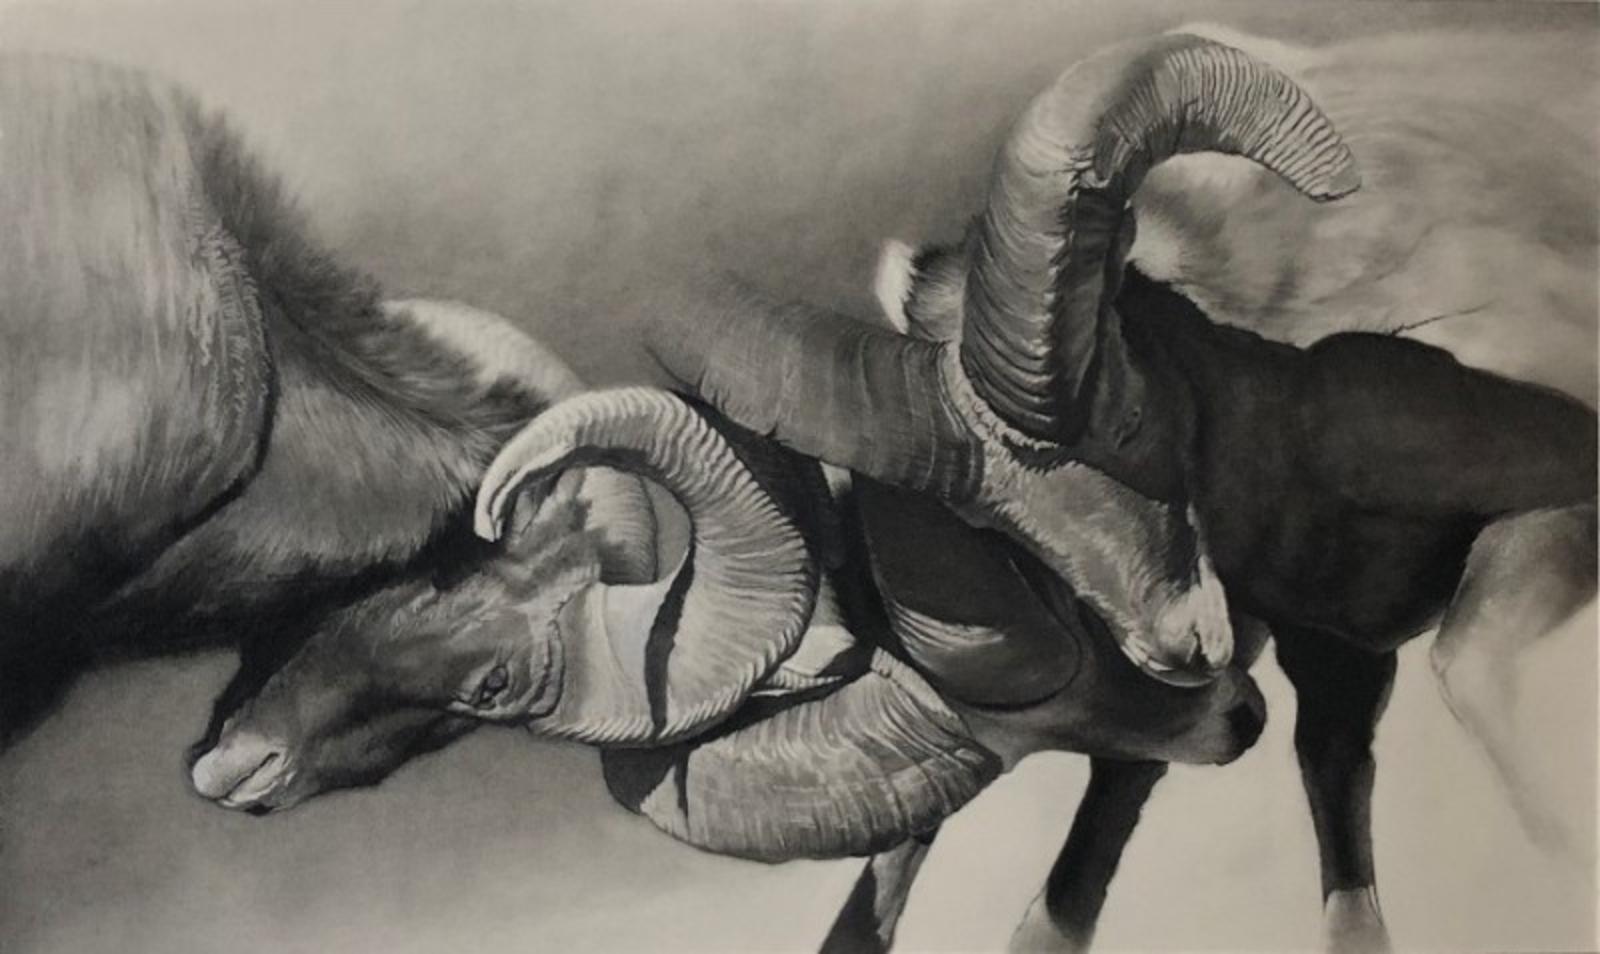 &quot;Bighorn Rams&quot; by Cole Johnson. No, it's not a black and white photograph. And yes, it's hard to believe that someone could deliver a scene so vivid, dramatic with light, shadow and value, and do it in graphite and charcoal.  But Johnson brilliantly does it here. He can't get enough of the Greater Yellowstone Ecosystem and its animal inhabitants. To learn more about him and his work, go to http://www.colejohnsonart.com